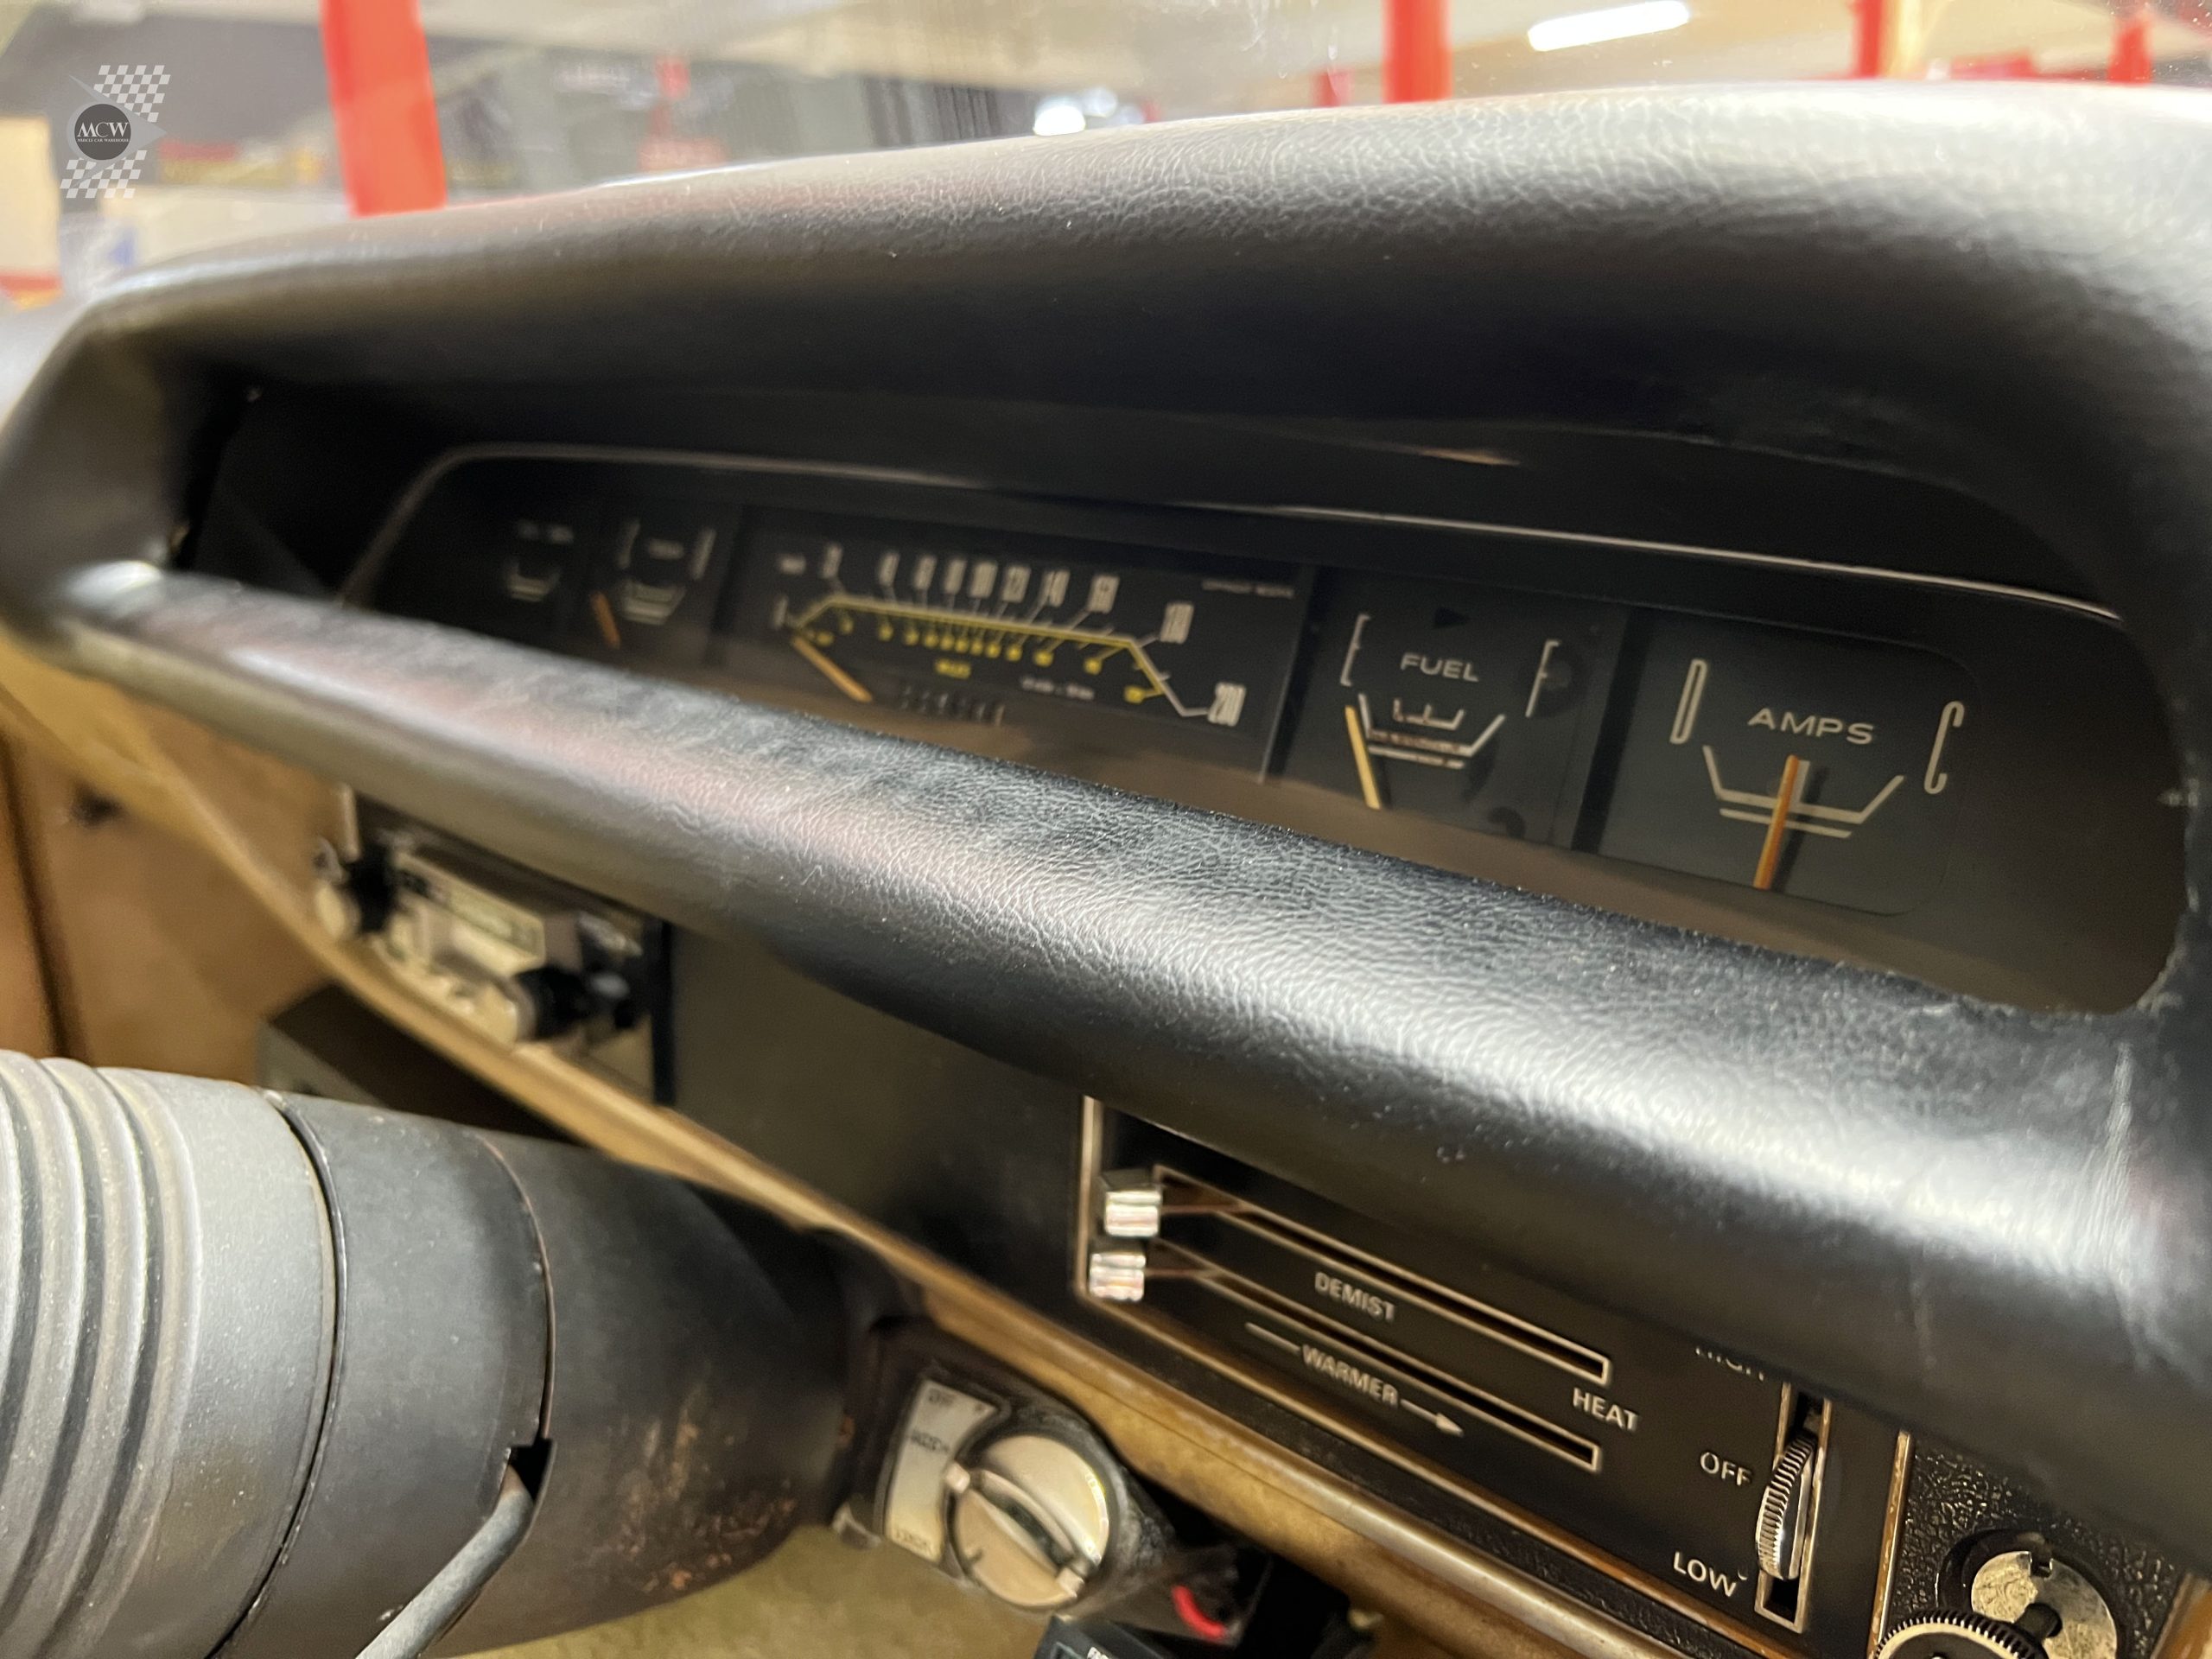 1972 Valiant Charger VH Coupe Interior - Muscle Car Warehouse